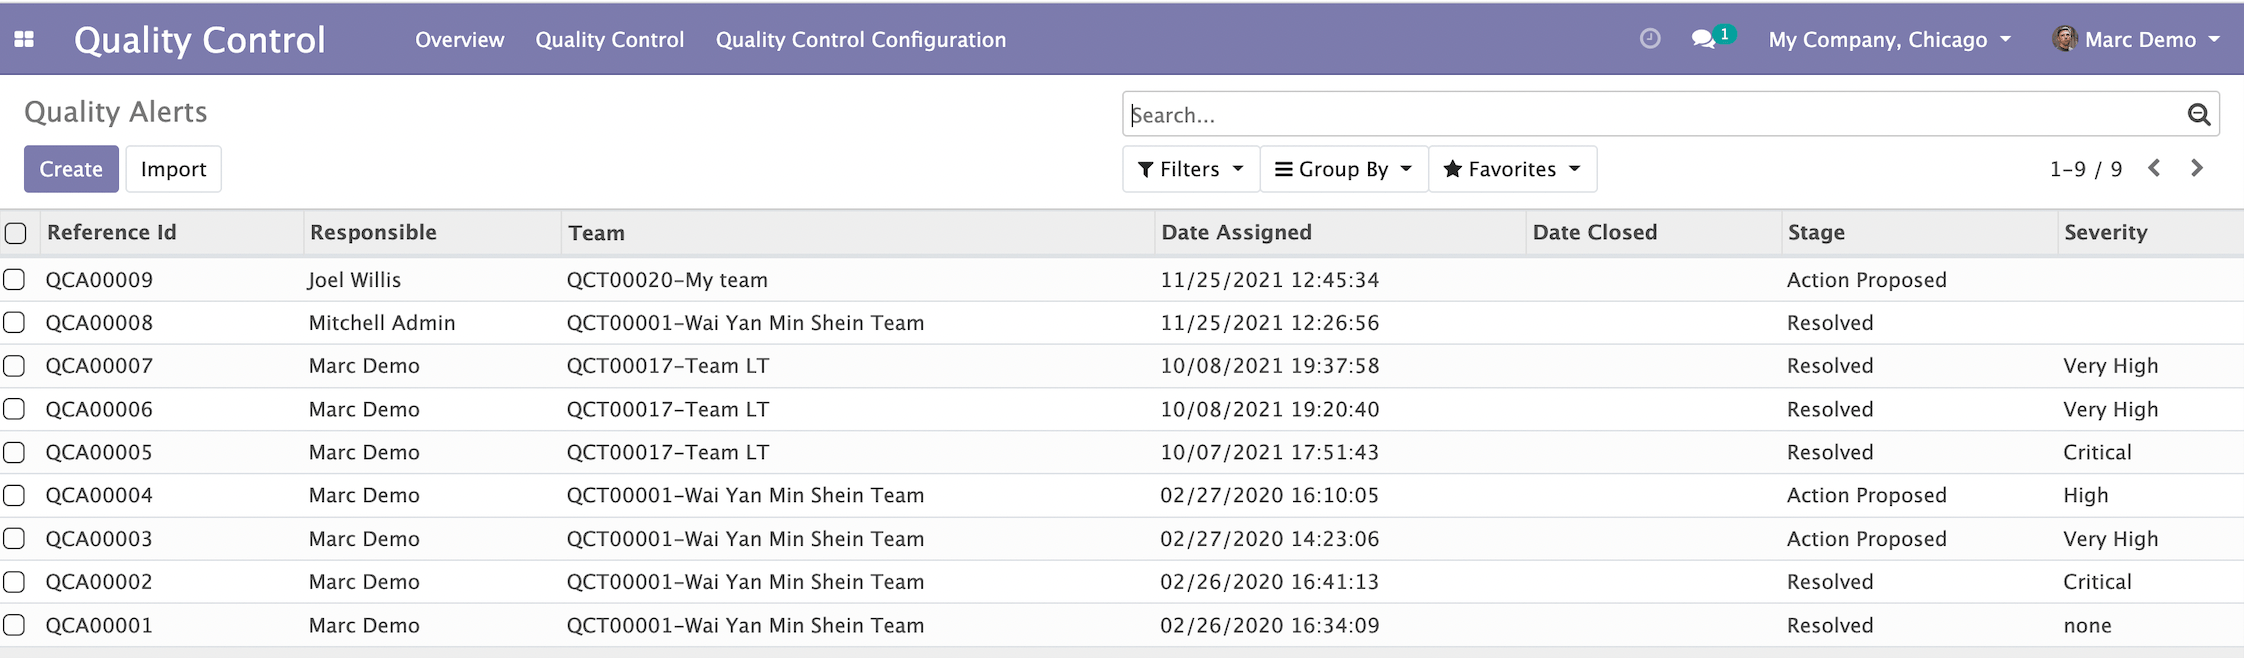 Odoo Inventory Quality Alerts